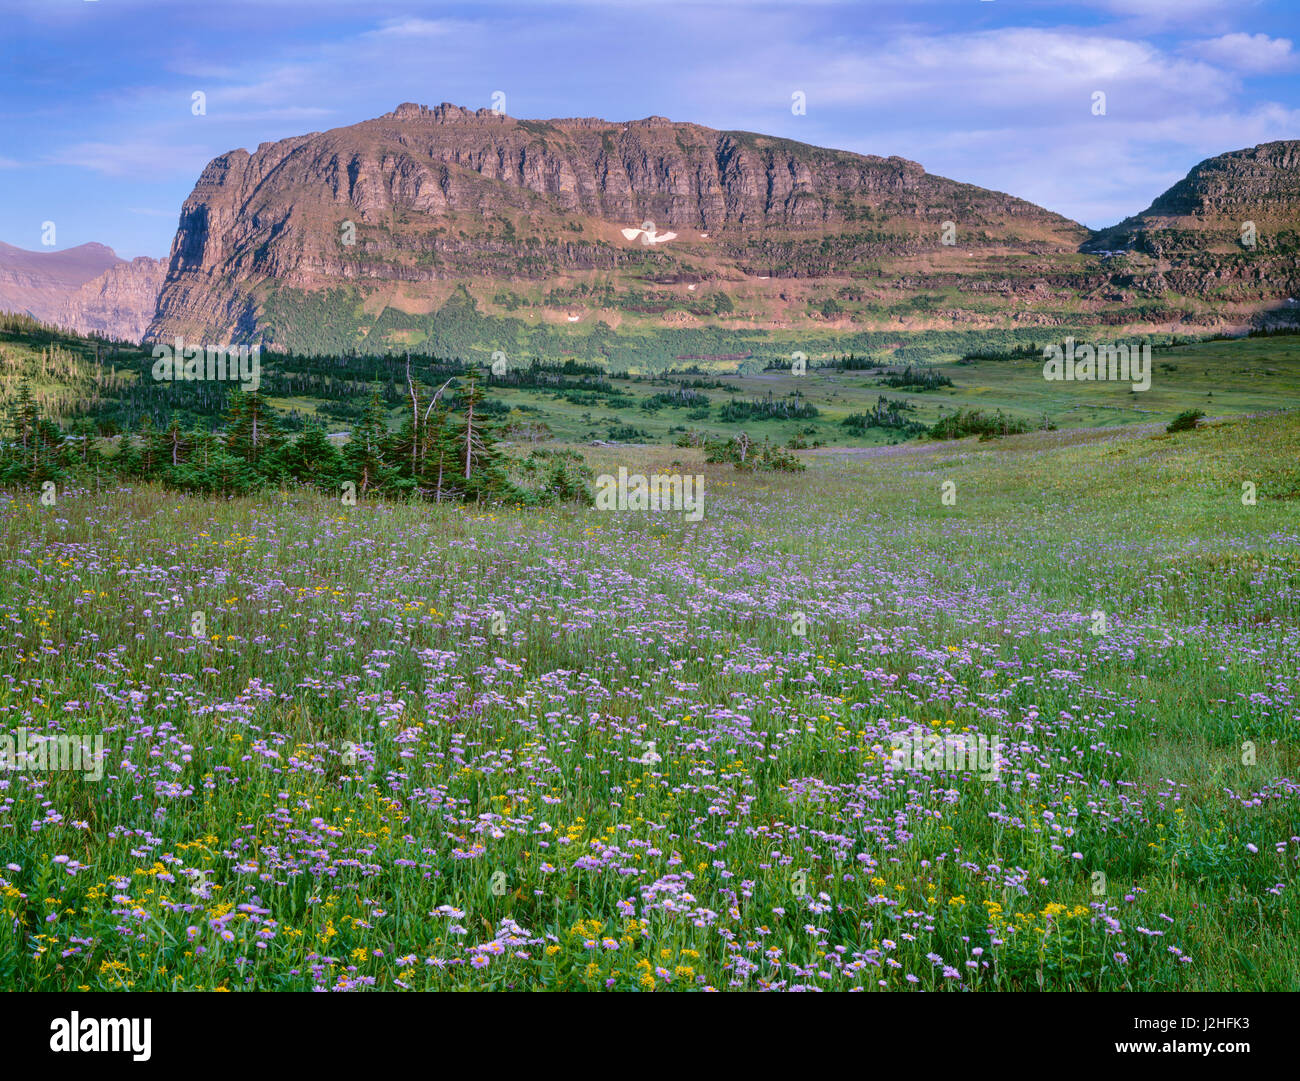 Heavy Runner Mountain rises beyond meadow of showy fleabane and arnica at Hanging Gardens area above Logan Pass, Glacier National Park, Montana, USA (Large format sizes available) Stock Photo